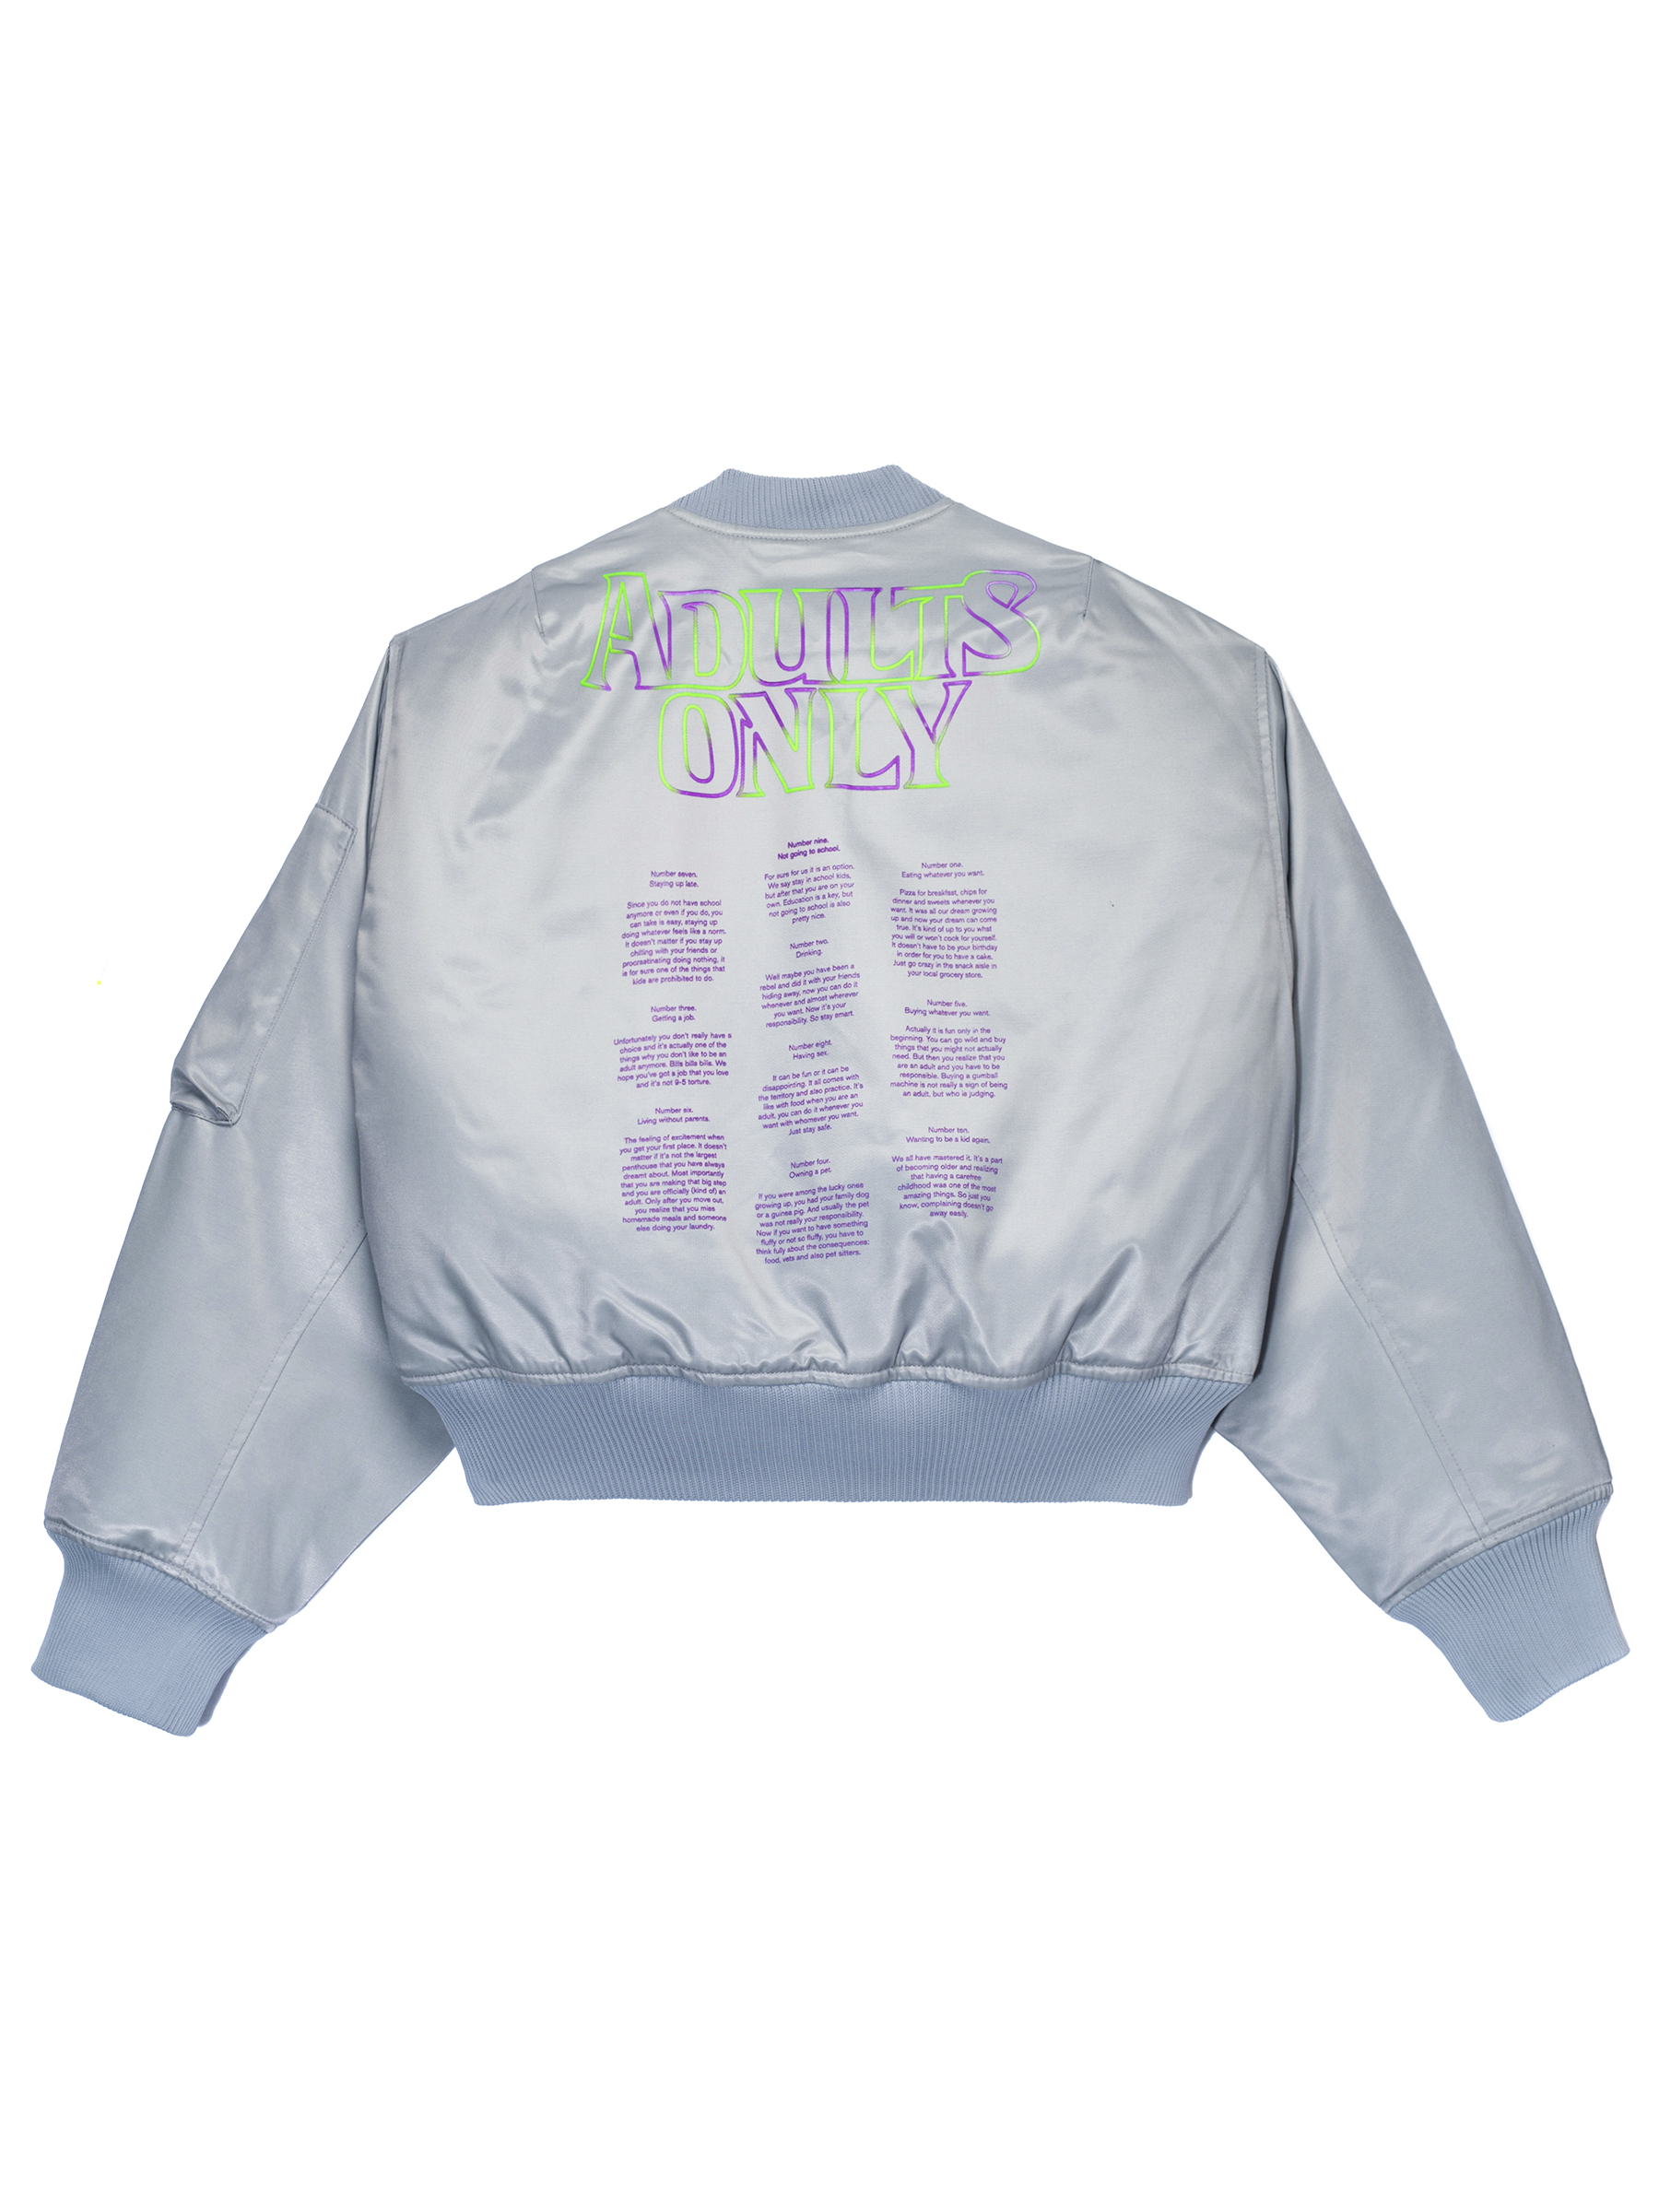 ADULTS ONLY BOMBER JACKET 